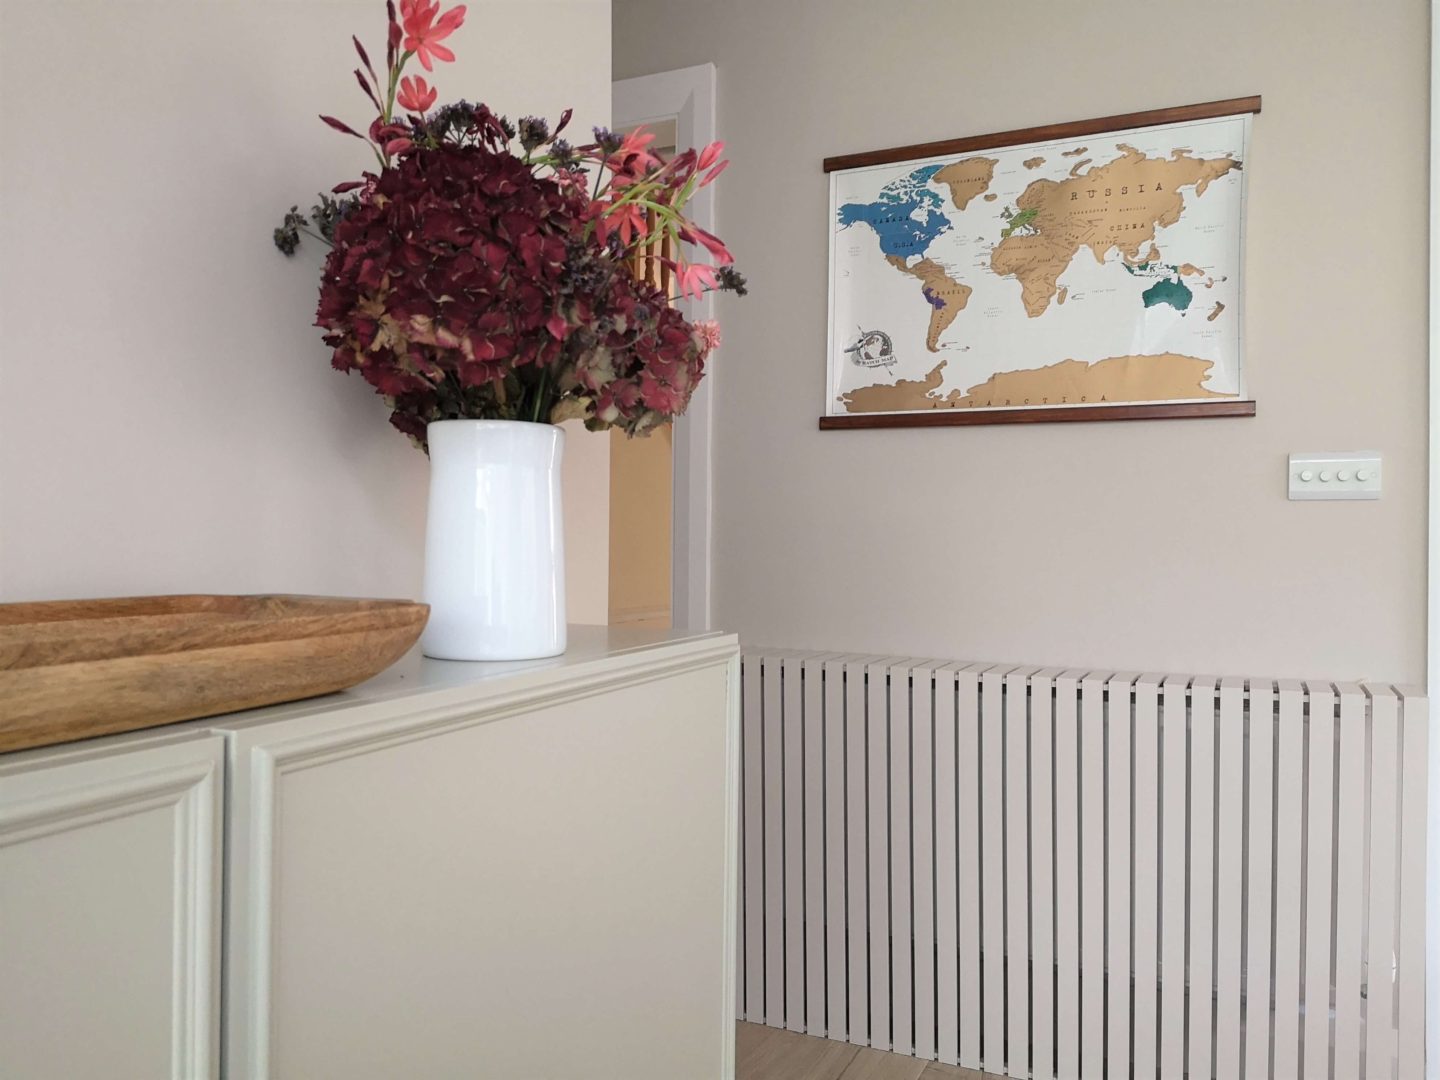 A world map hanging on the wall with wooden slats as the frame. Underneath is radiator cover made using slats.